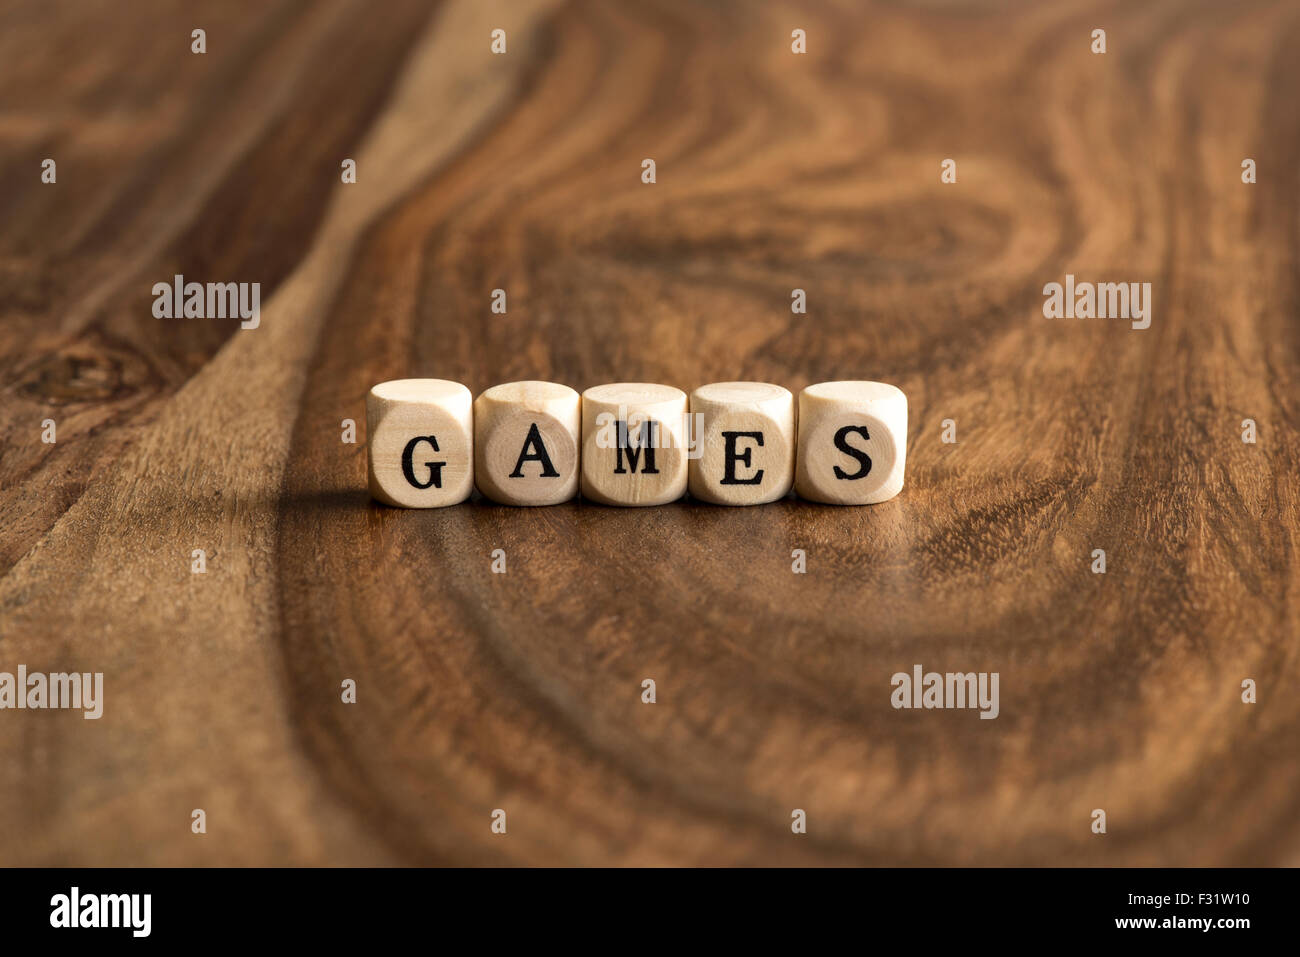 Word GAME made with block wooden letters over the wooden board surface Stock Photo